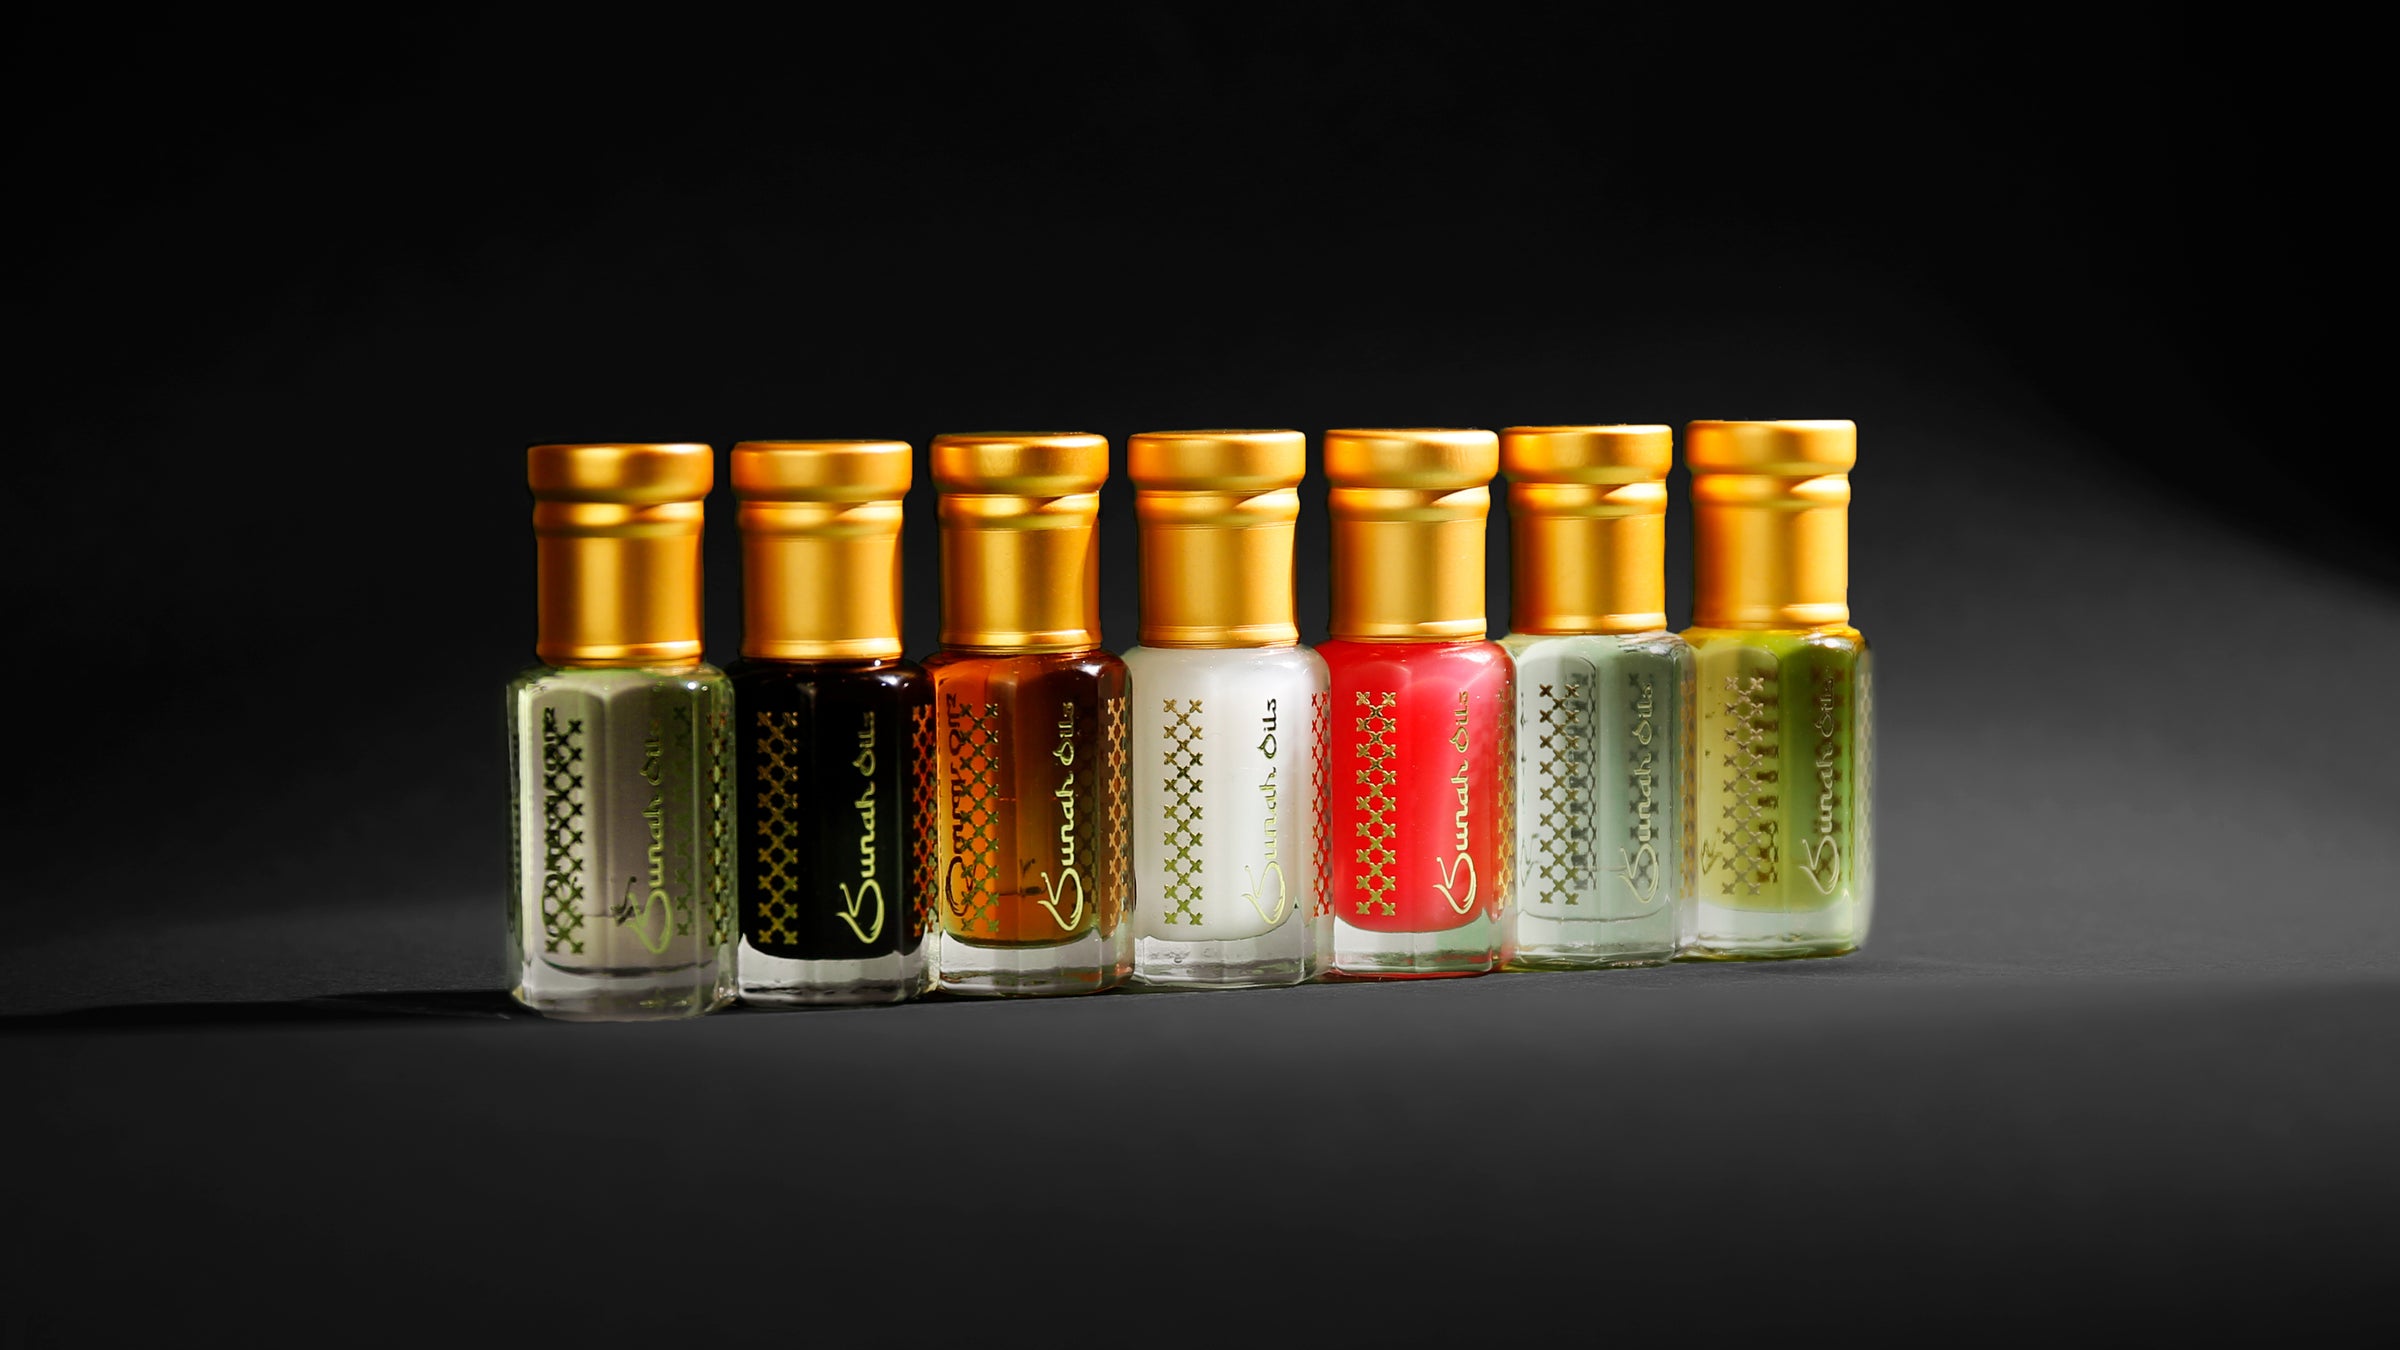 Our perfume oils are purely alcohol-free making them highly concentrated, lasting up to 5x longer on skin, as they evaporate gently with body heat creating an everlasting fragrance.